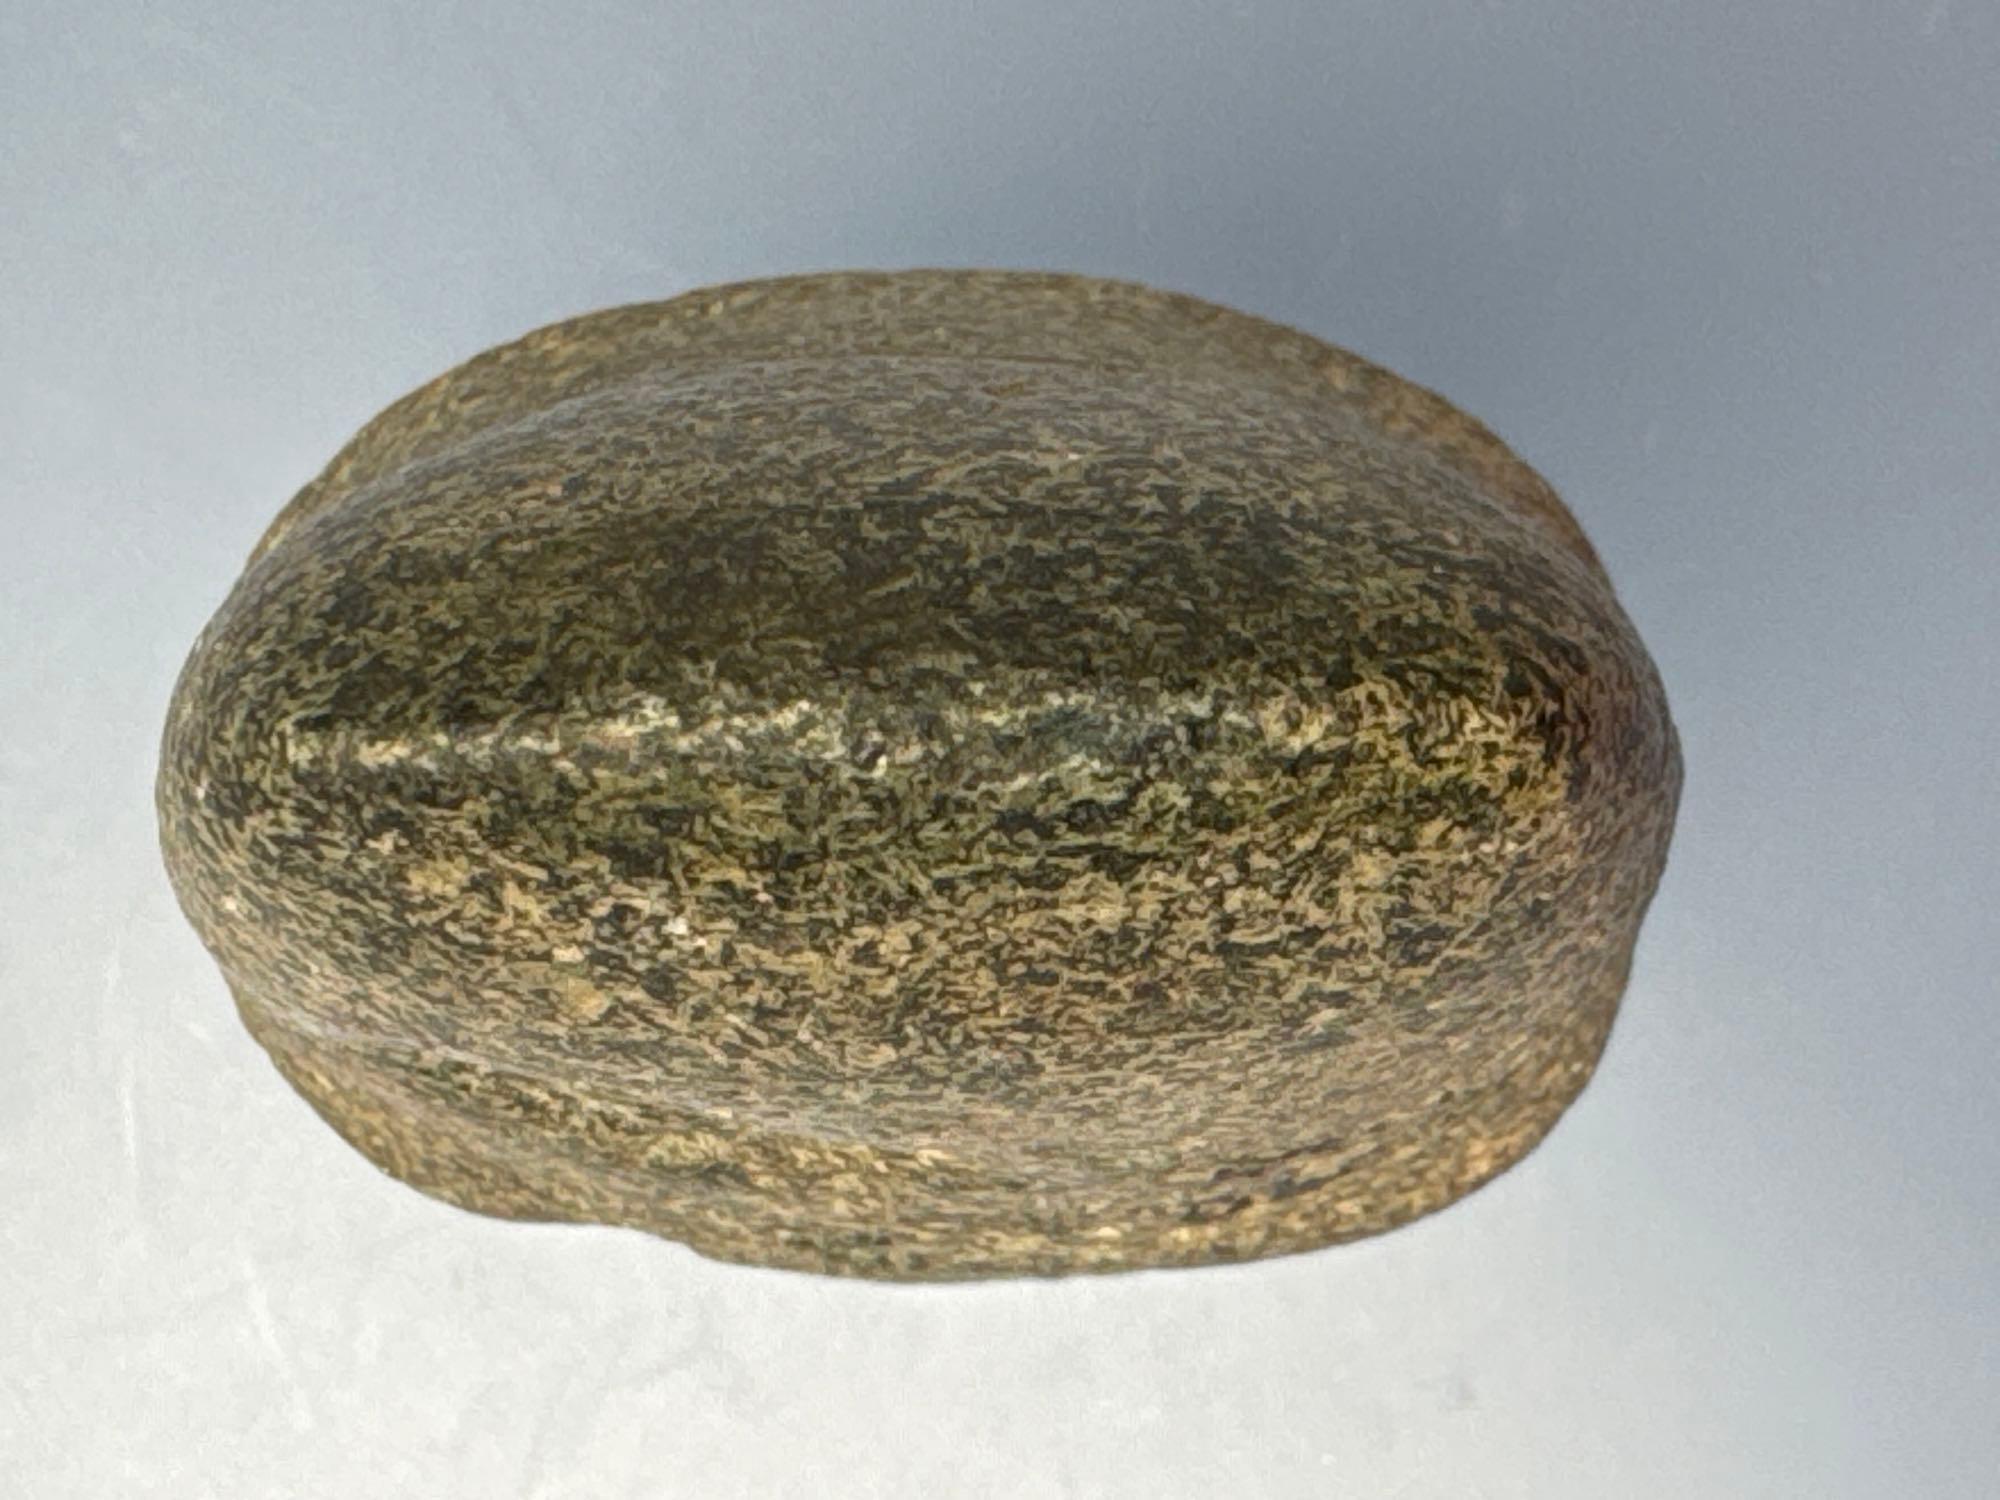 SUPERB 4 1/16" Granite Axe, 3/4 Grooved, SITS ON END, Highly Polished Example, Found in Ohio, Ex: Po